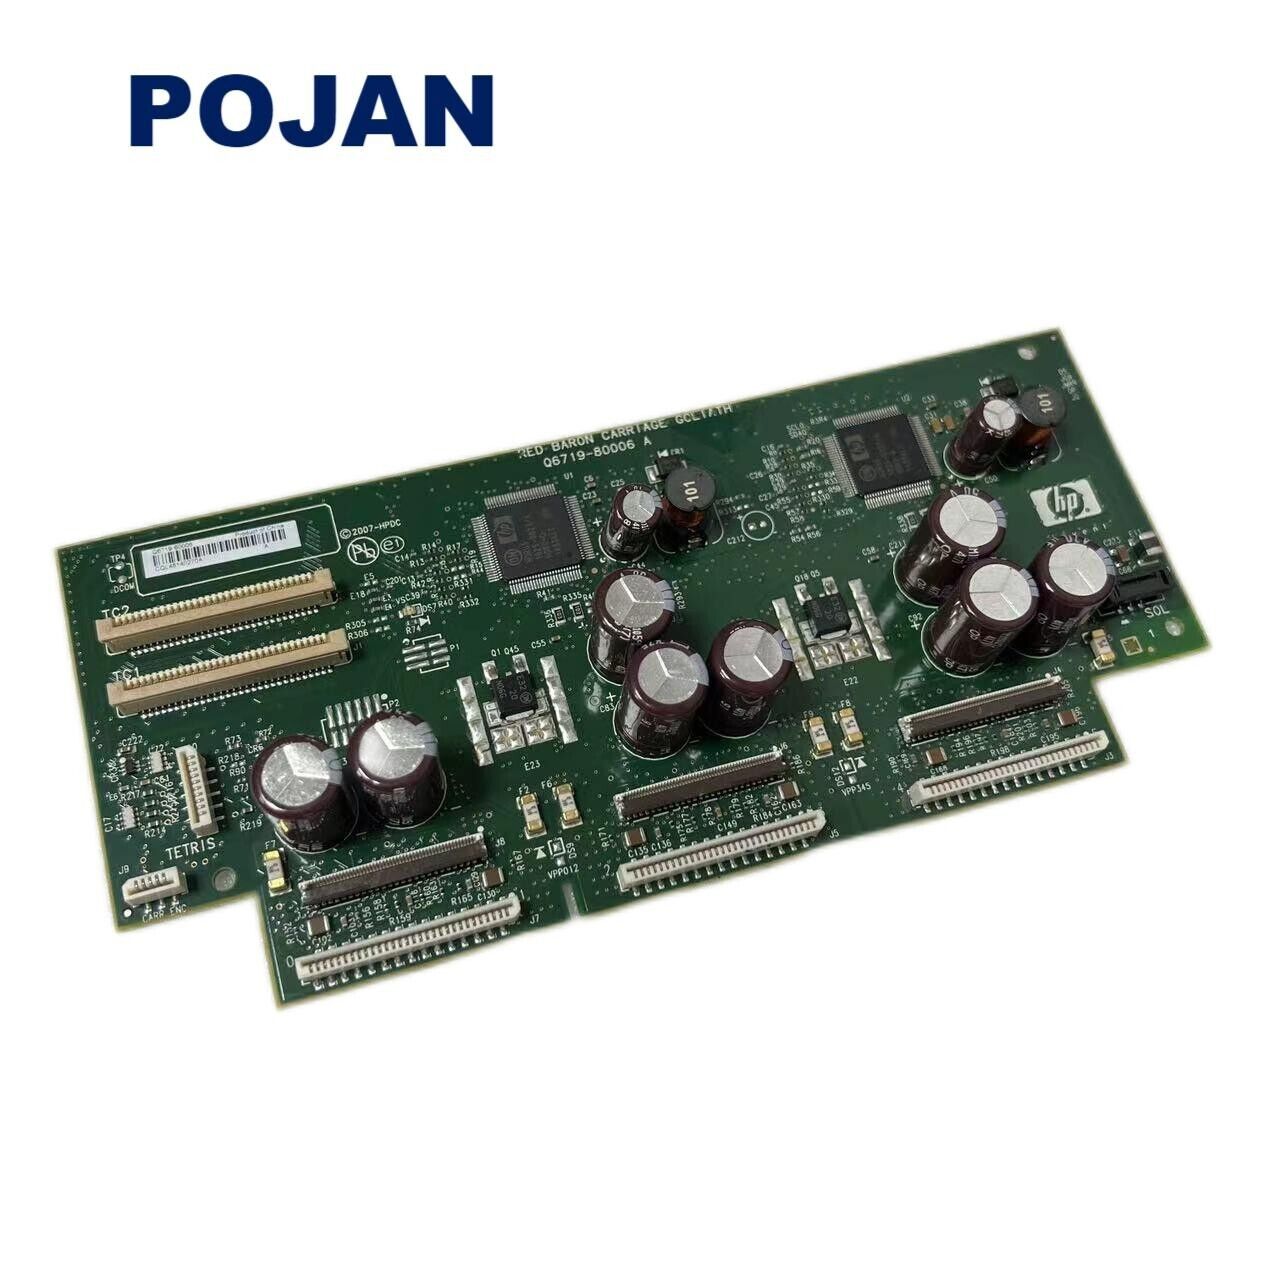 Carriage PCA Board Q6718-67012 Q6718-67003 Fit For HP Designjet Z3200